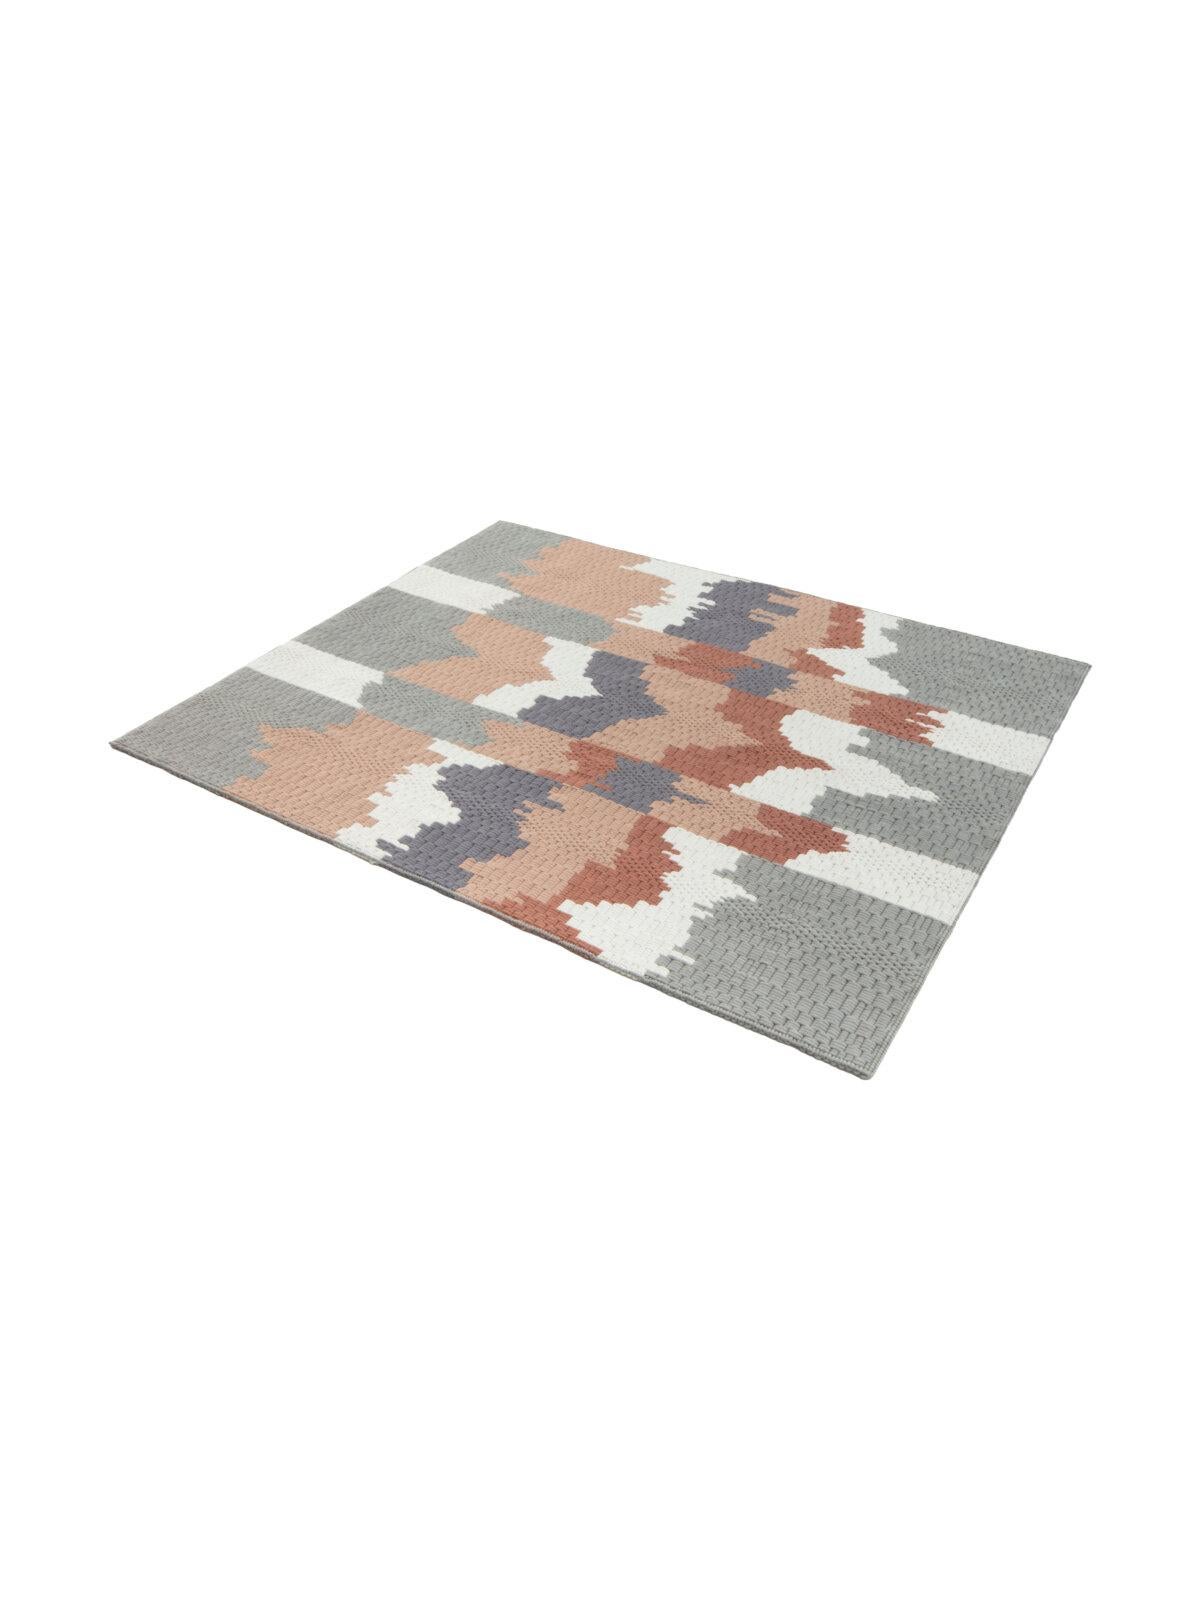 cc-tapis SONORA IRON handmade rug by Patricia Urquiola In New Condition For Sale In Brooklyn, NY